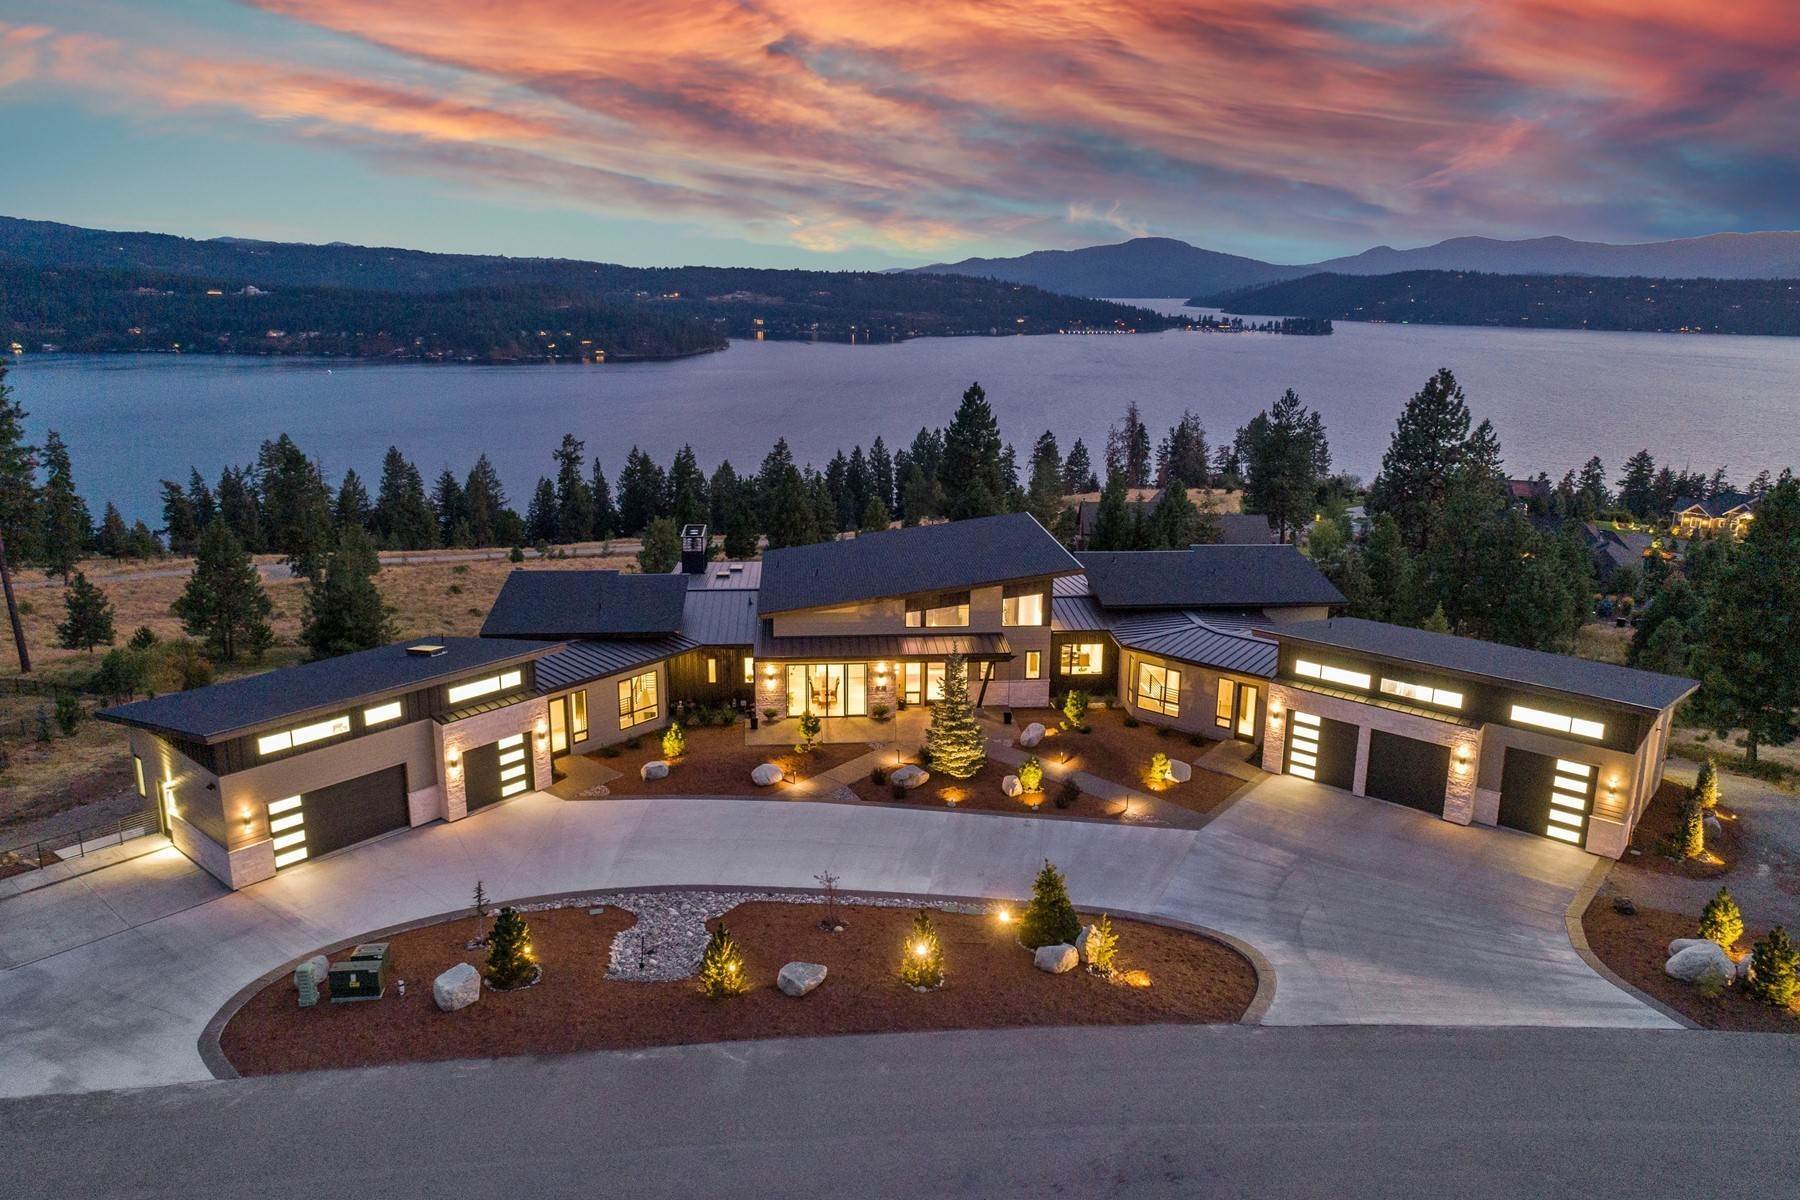 Single Family Homes for Sale at Mountain Contemporary Beauty 2766 Helen Dr Coeur d’Alene, Idaho 83814 United States